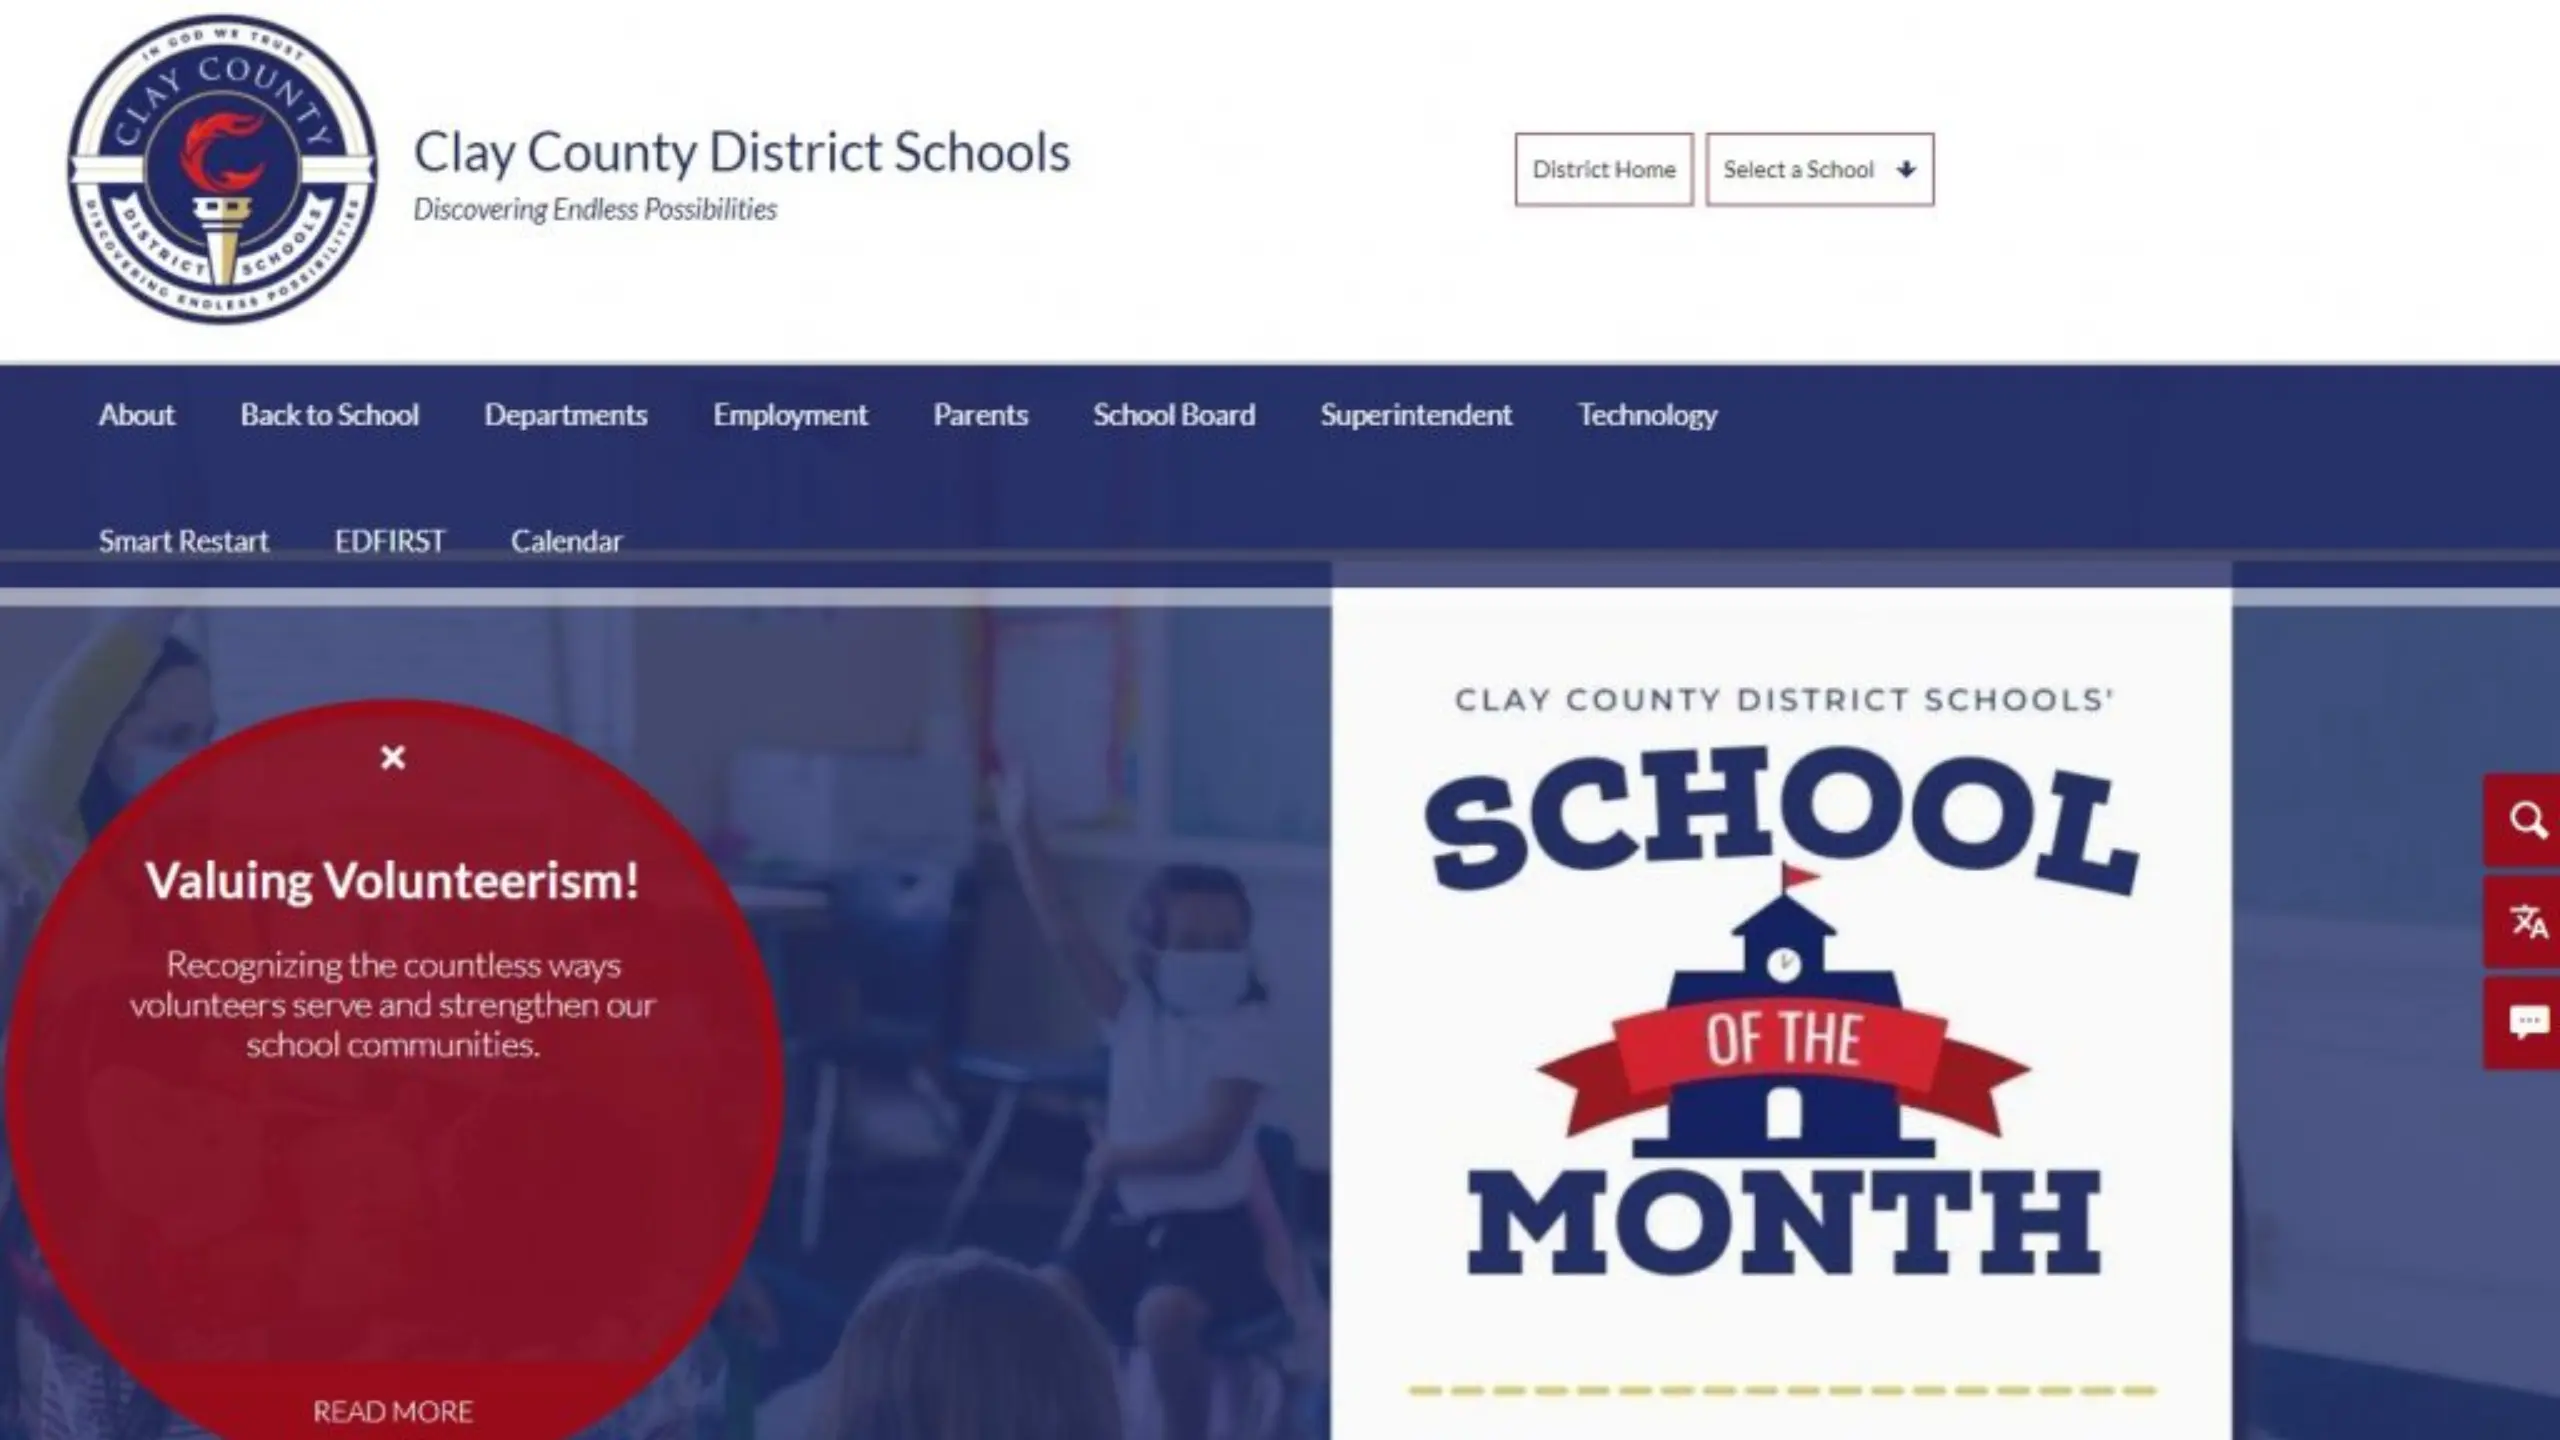 OneClay Portal A Guide to Access Clay County District Schools